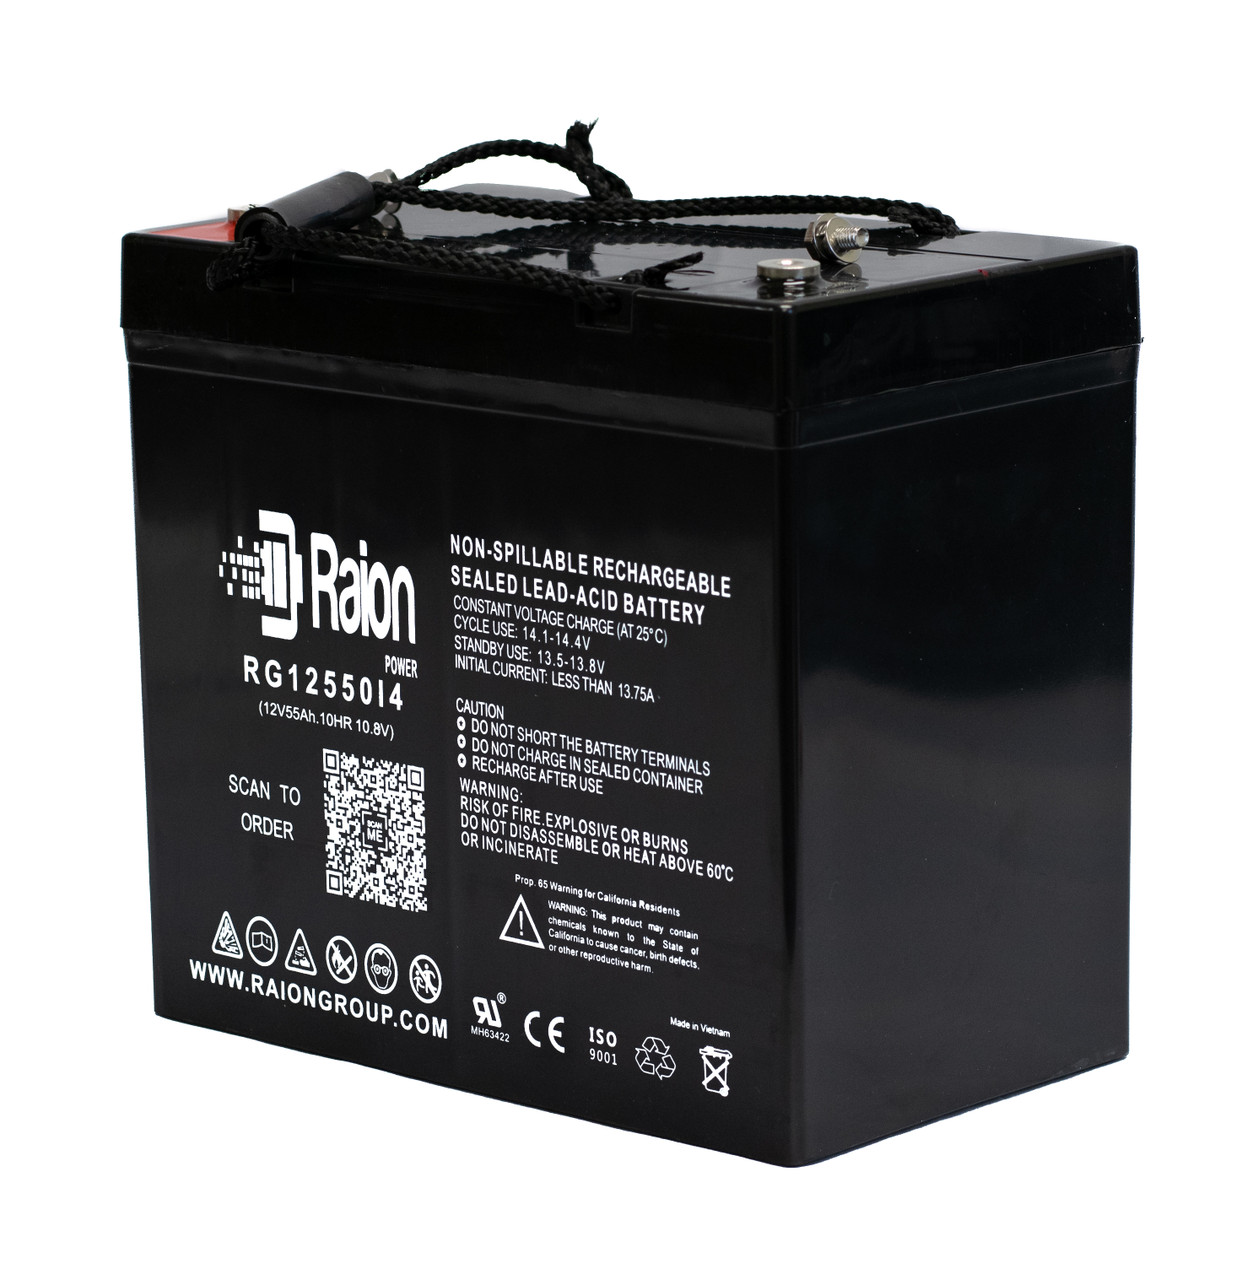 Raion Power Replacement 12V 55Ah Battery for Flying Power NM12-50 - 1 Pack